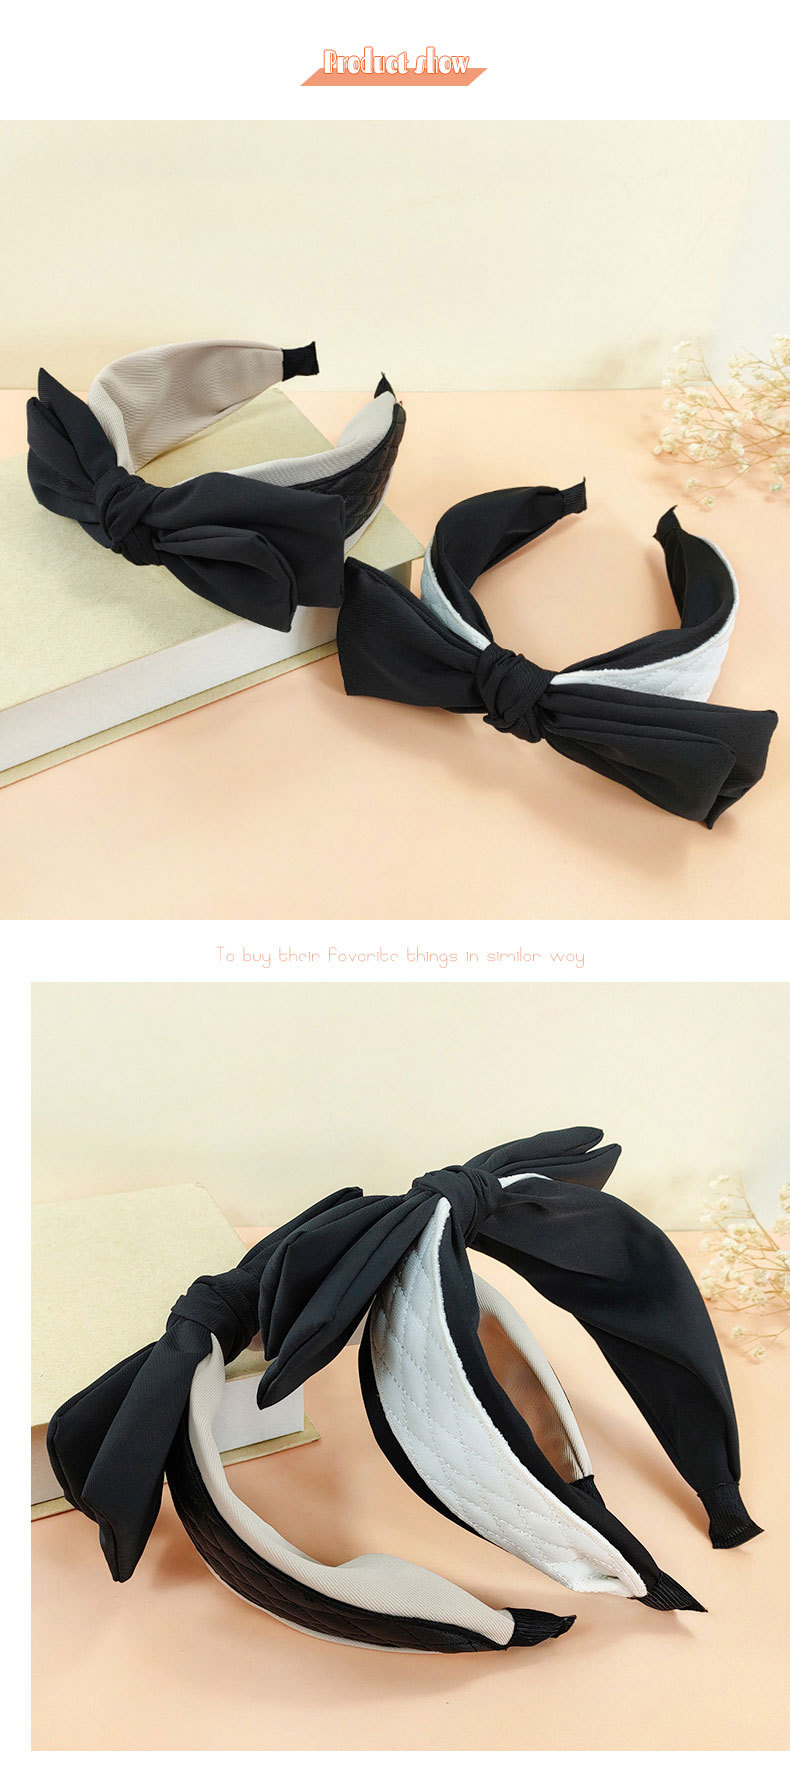 Korean doublelayer bow leather rabbit ear simple color matching headbandpicture1